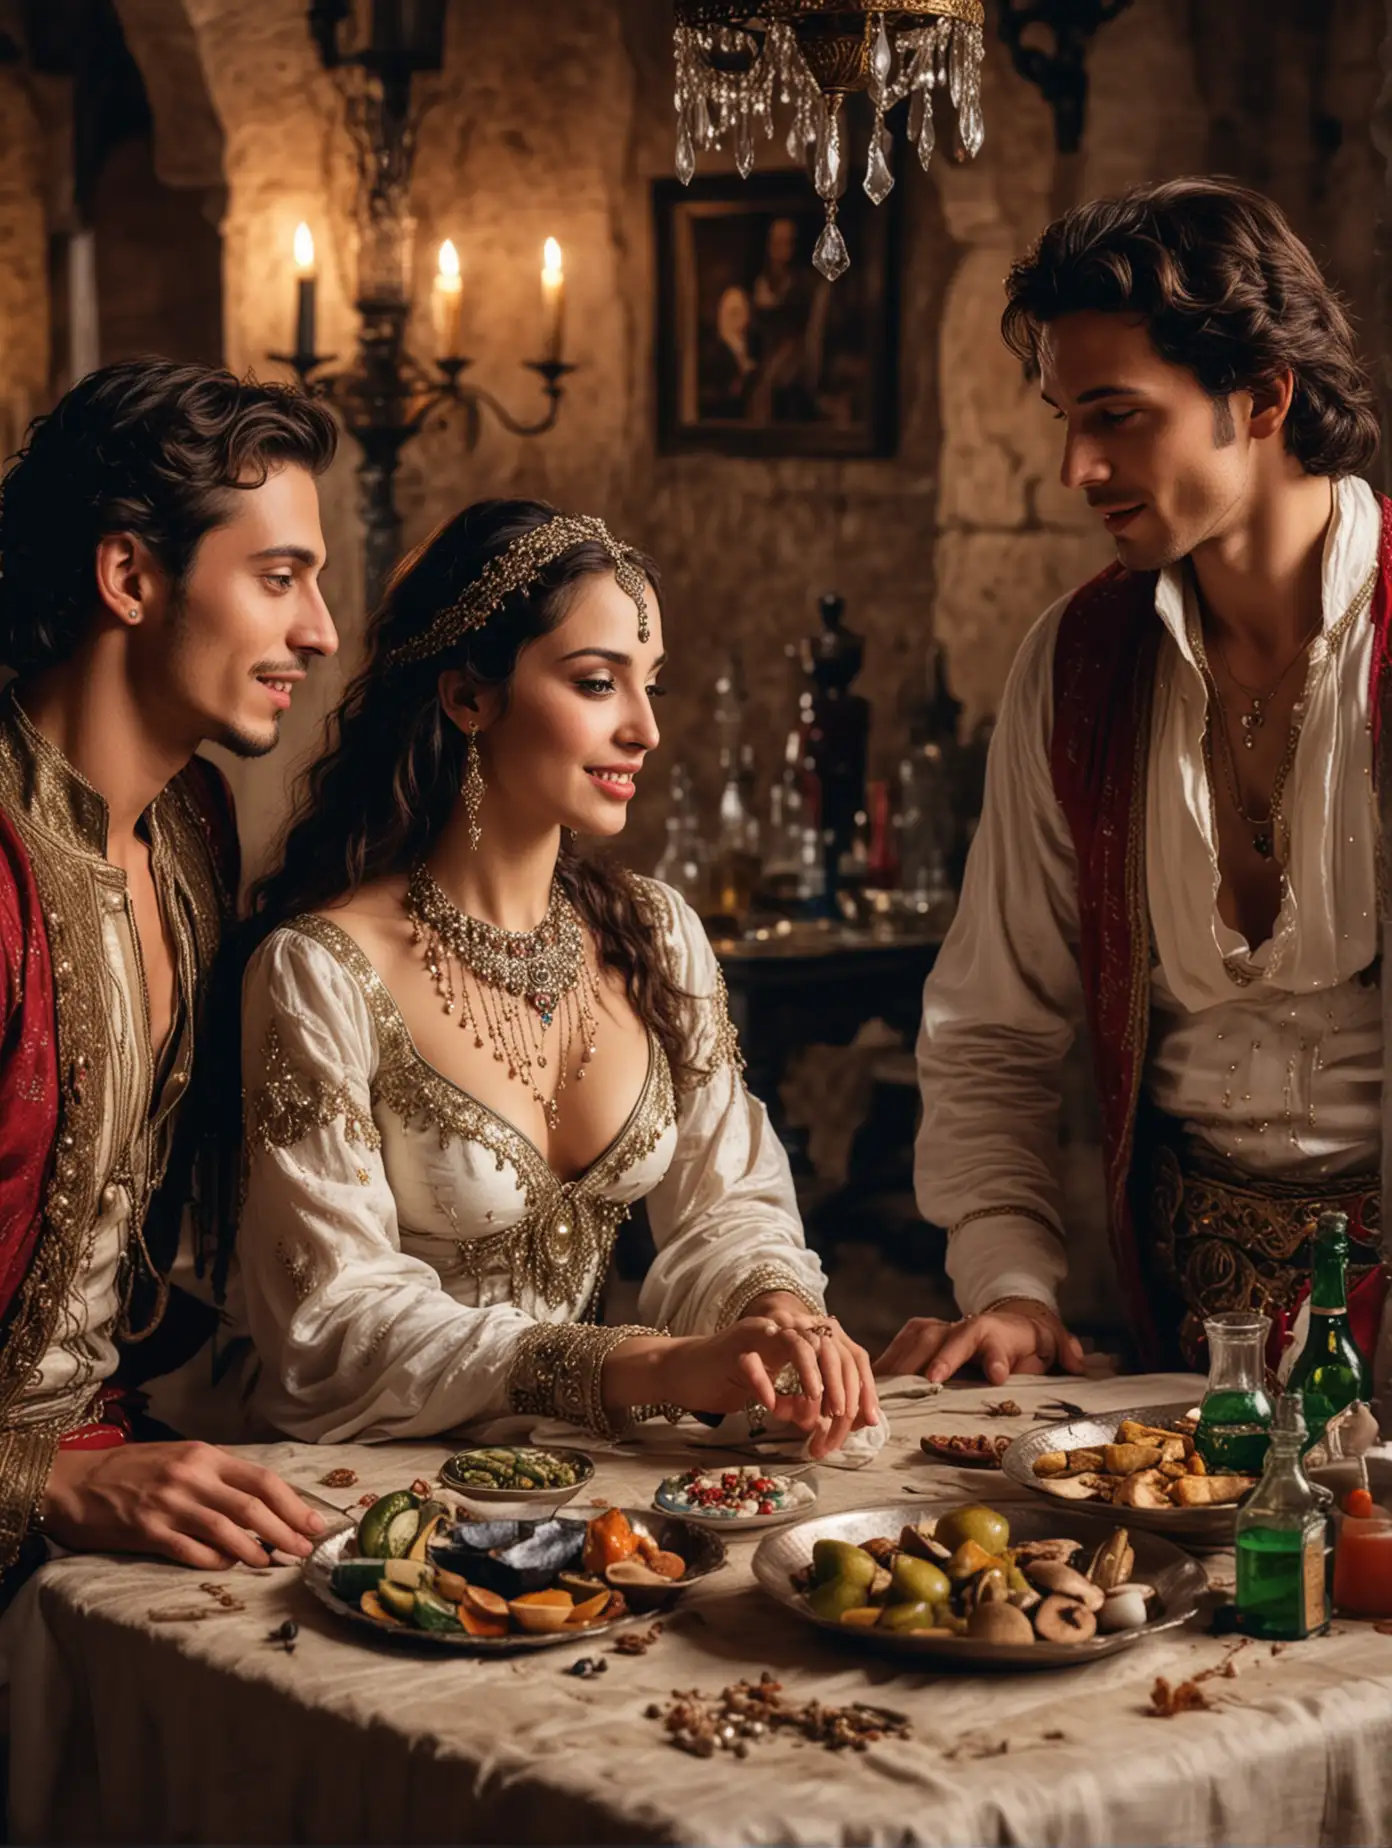 A hall in 17th century castle, close view of intimate and joyful talk between beautiful belly dancer surrounded by two handsome young man, light dress, sitting at a table with bottles and dishes ant night